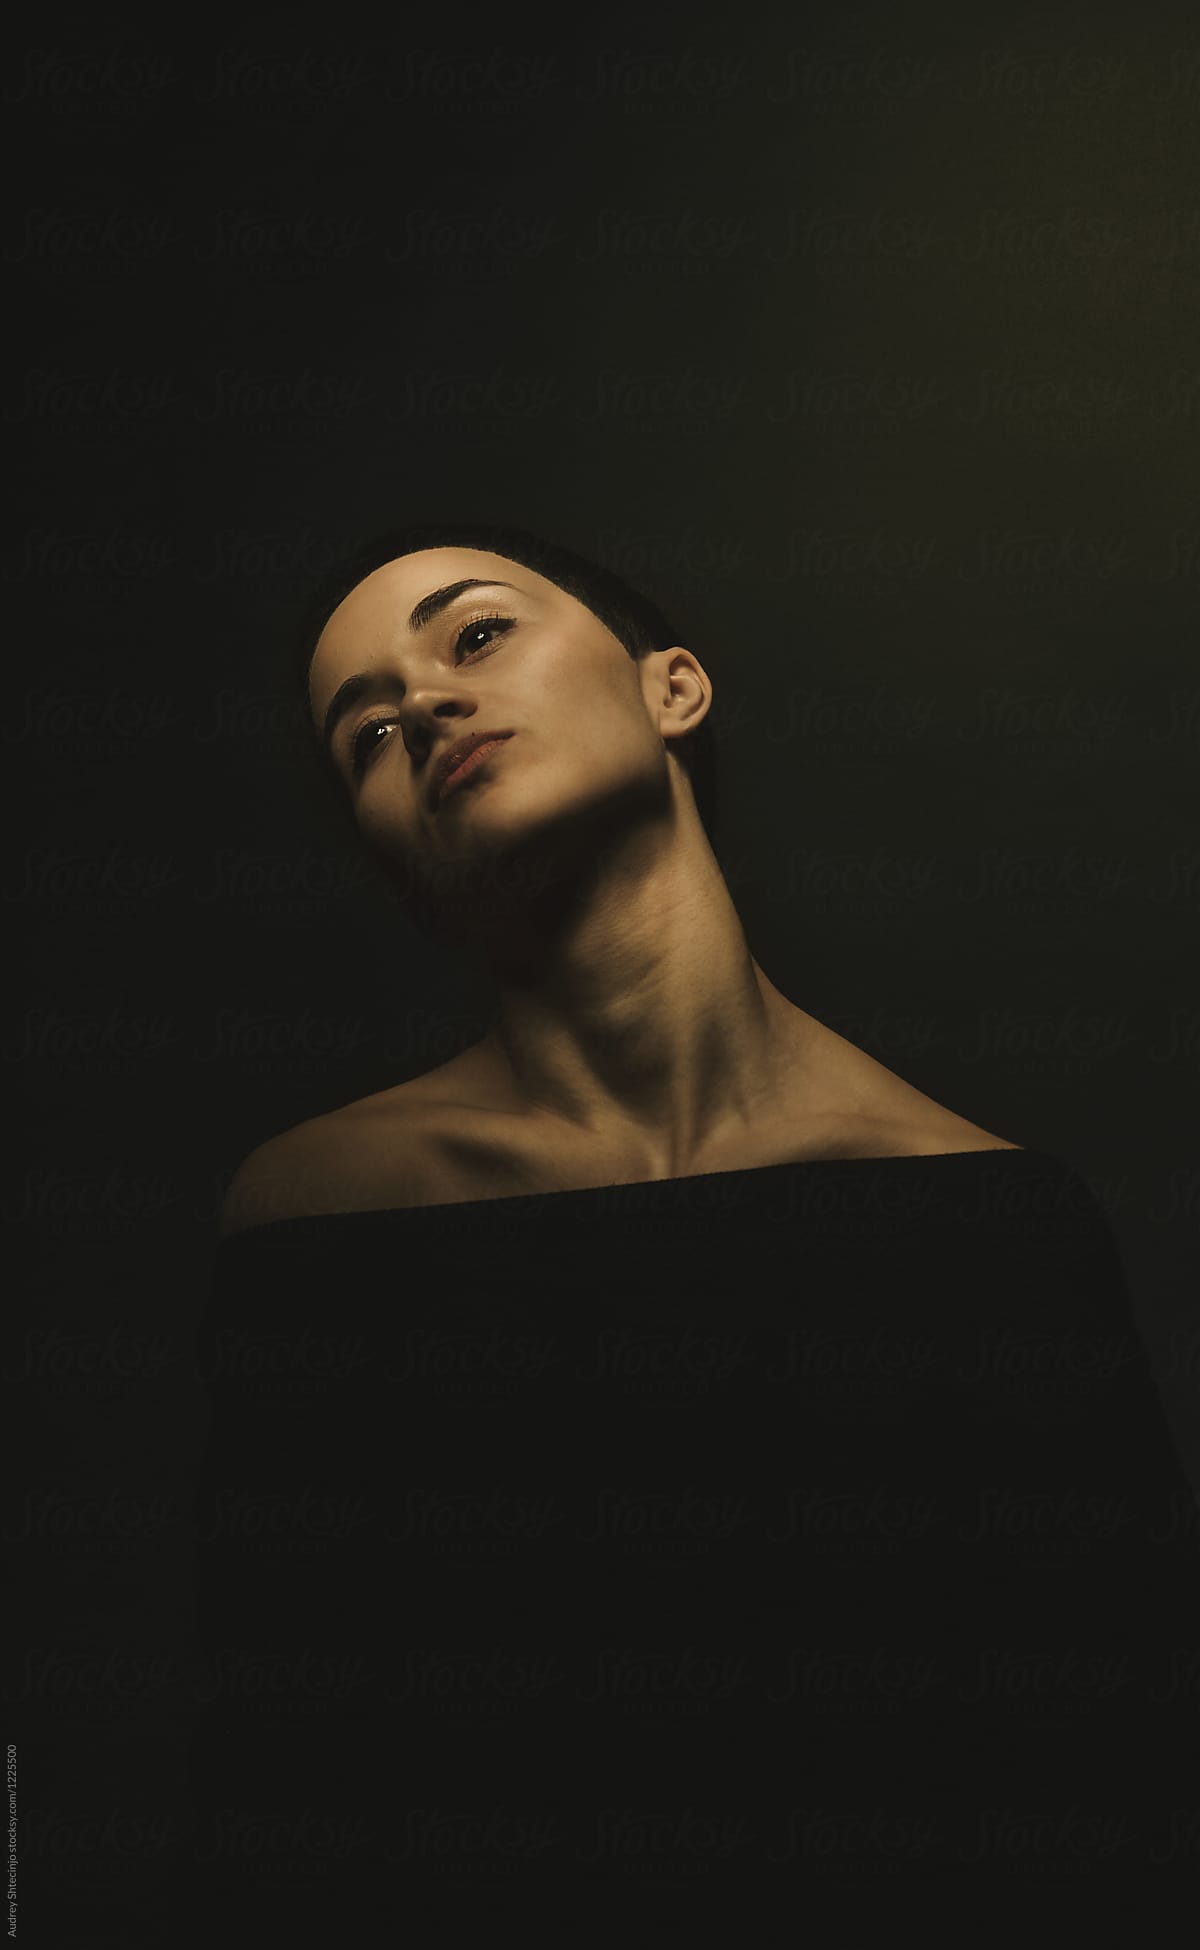 Dark/calm portrait of young woman with dark short hair